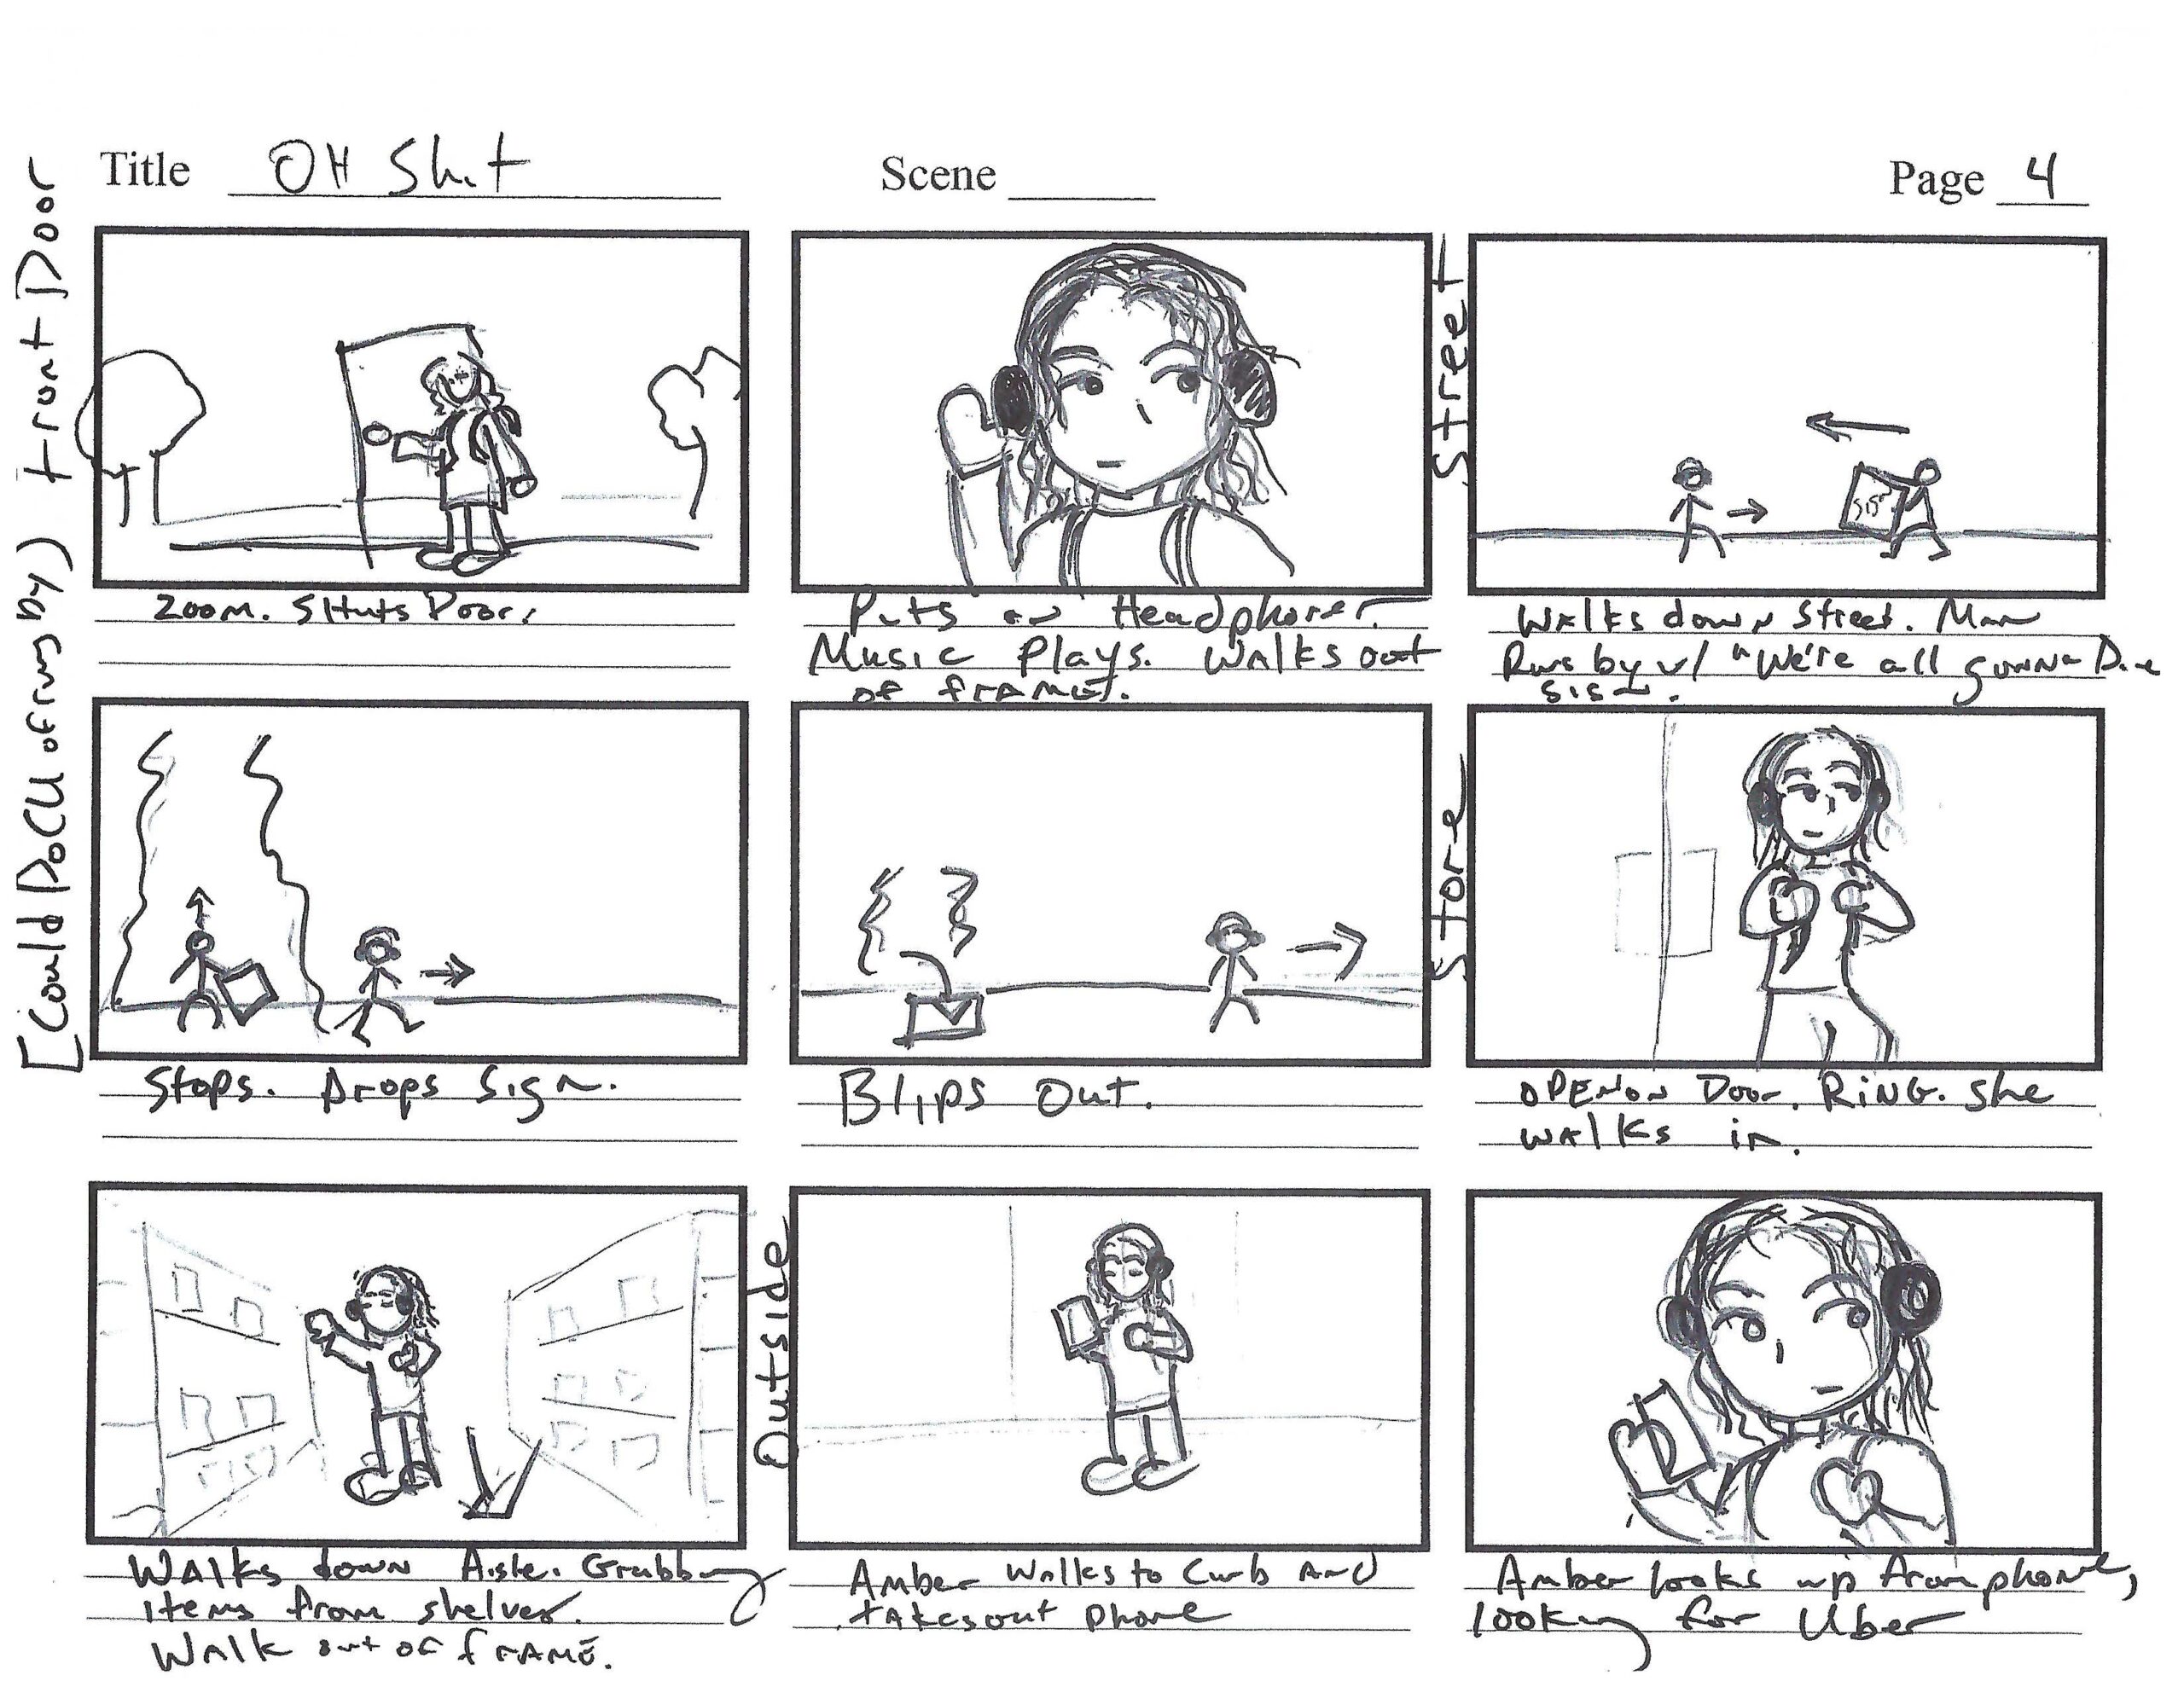 OhShitStoryboards_Page_4